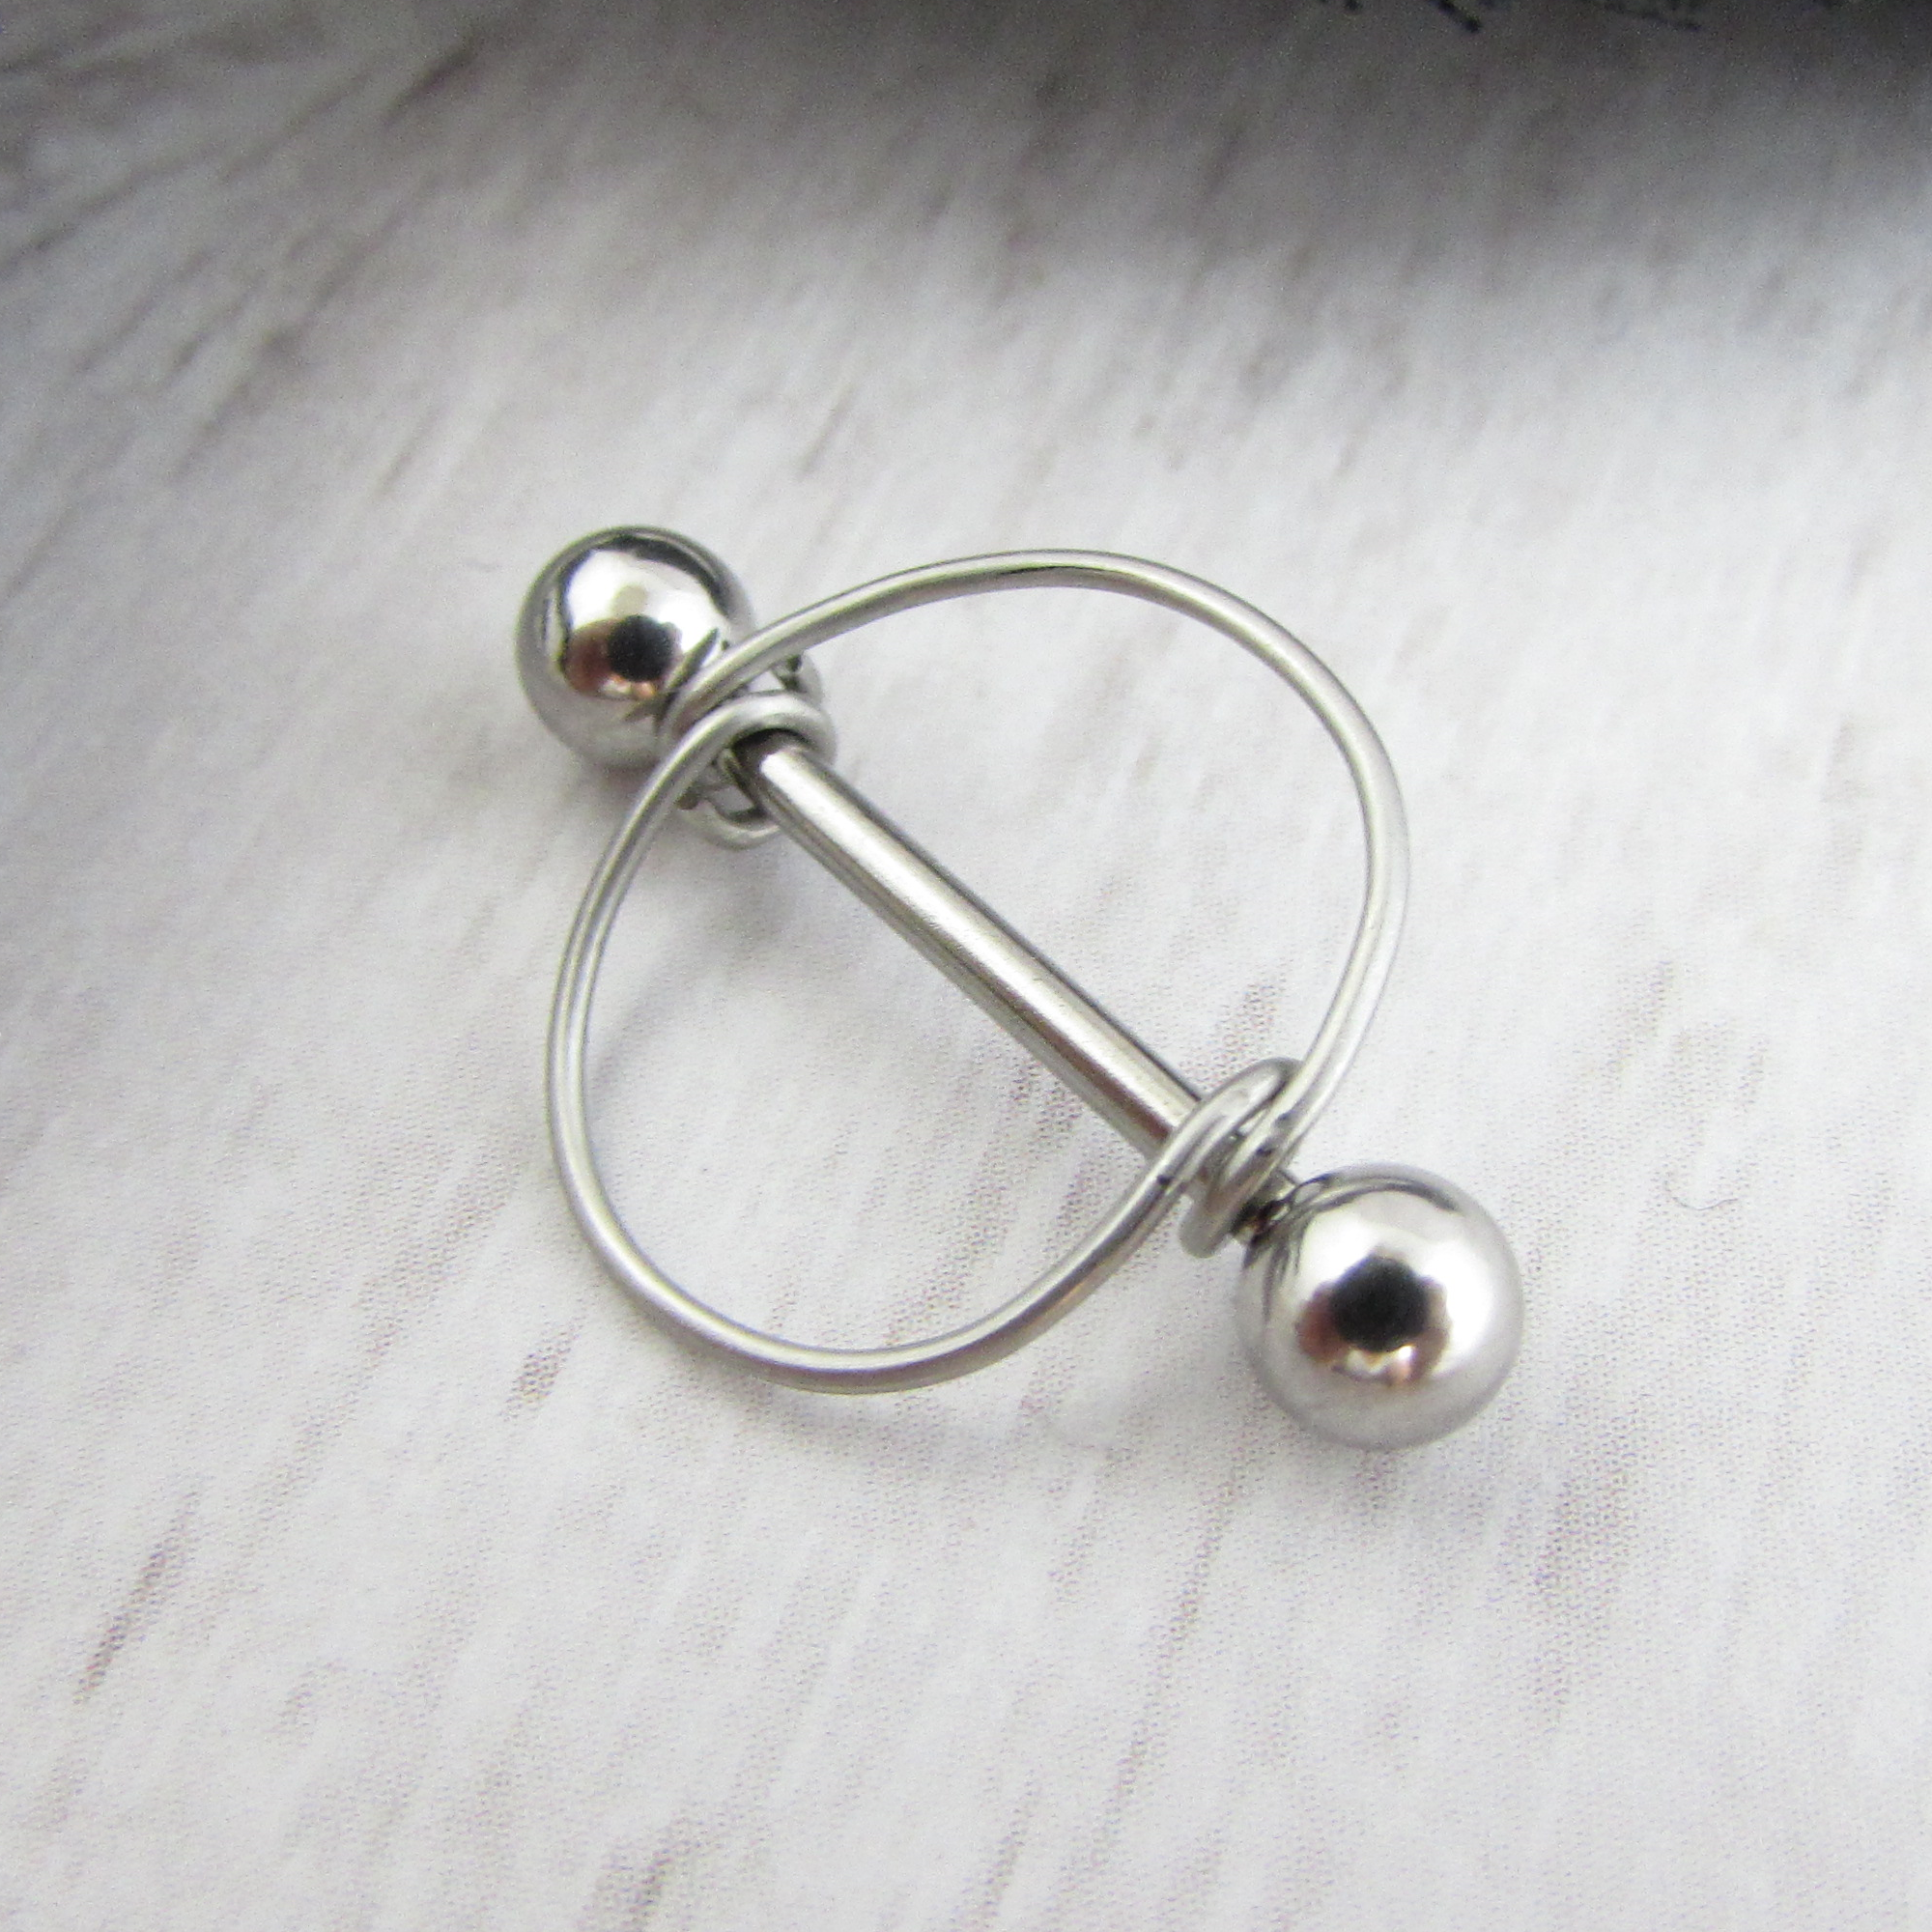 14g 316L Stainless Steel Round Frame Nipple Ring